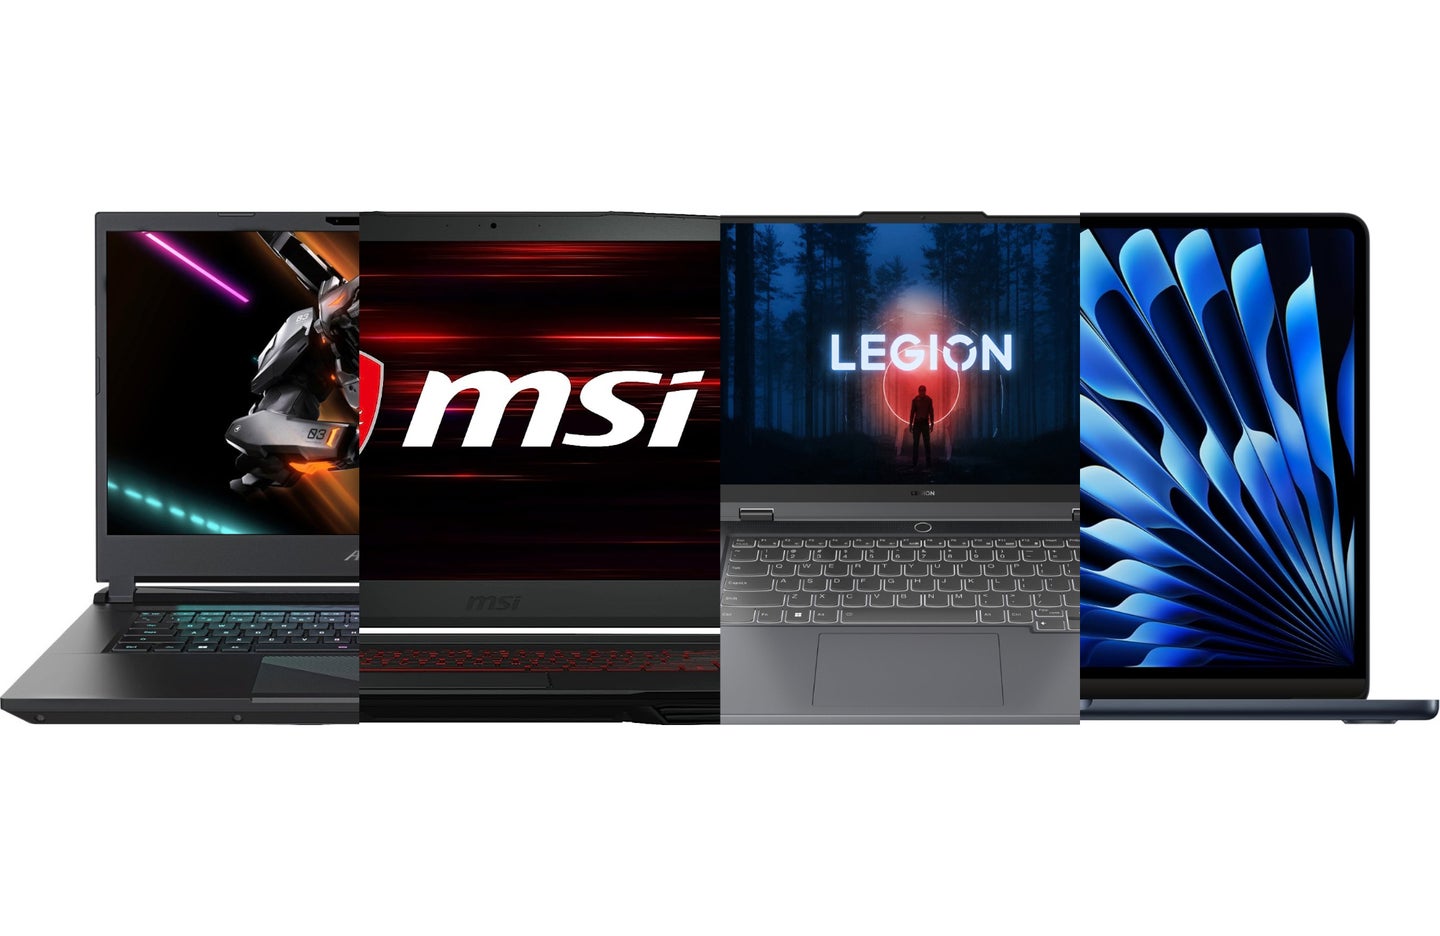 The best gaming laptops under $1,000 on a plain white background.